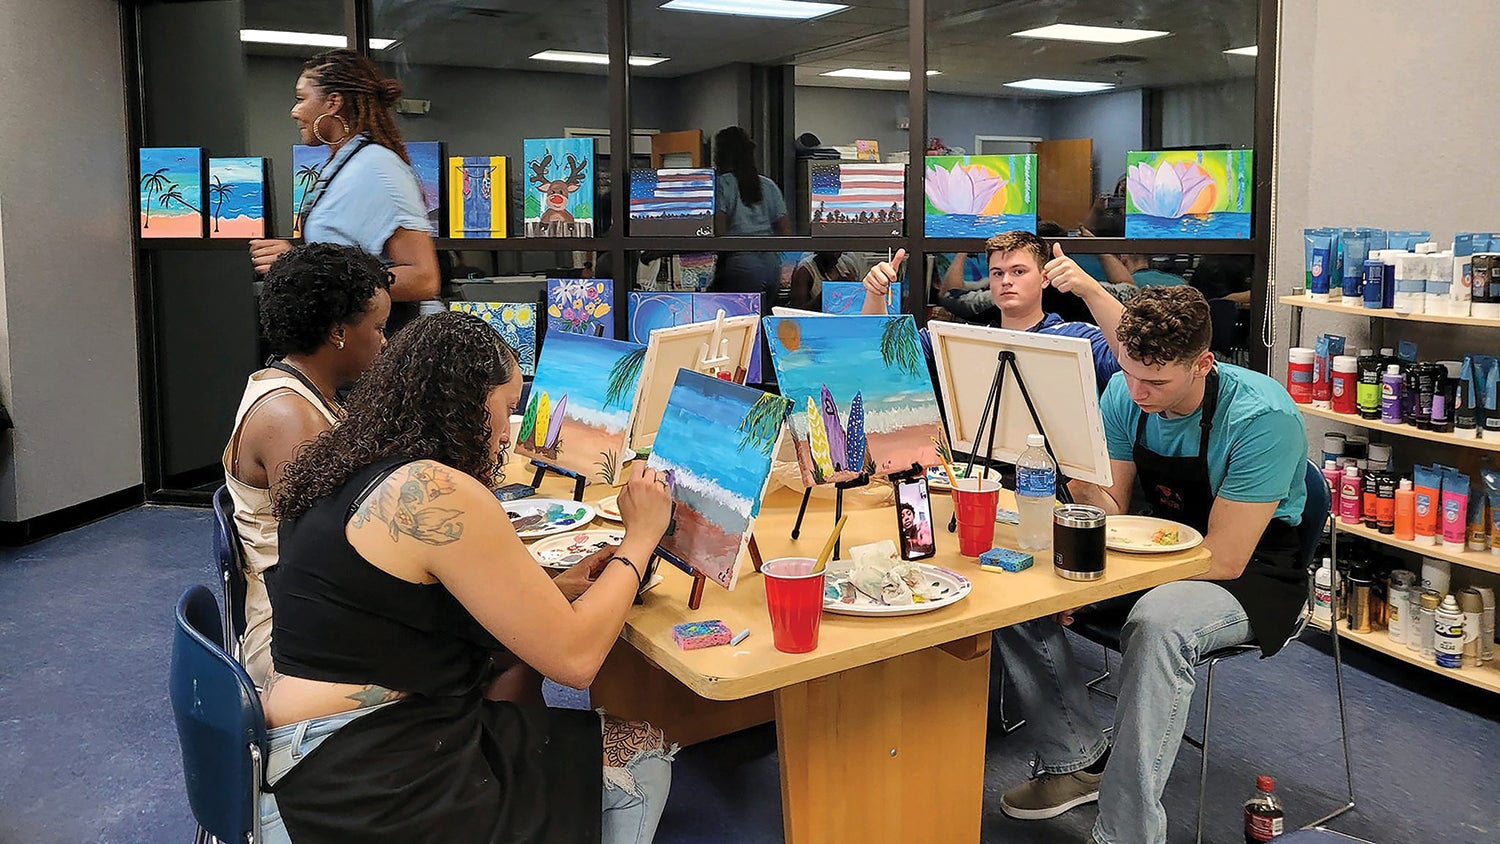 Budding artists work on seascapes during a Fort Jackson, South Carolina, Better Opportunities for Single Soldiers event. (Credit: U.S. Army/Emily Hileman)